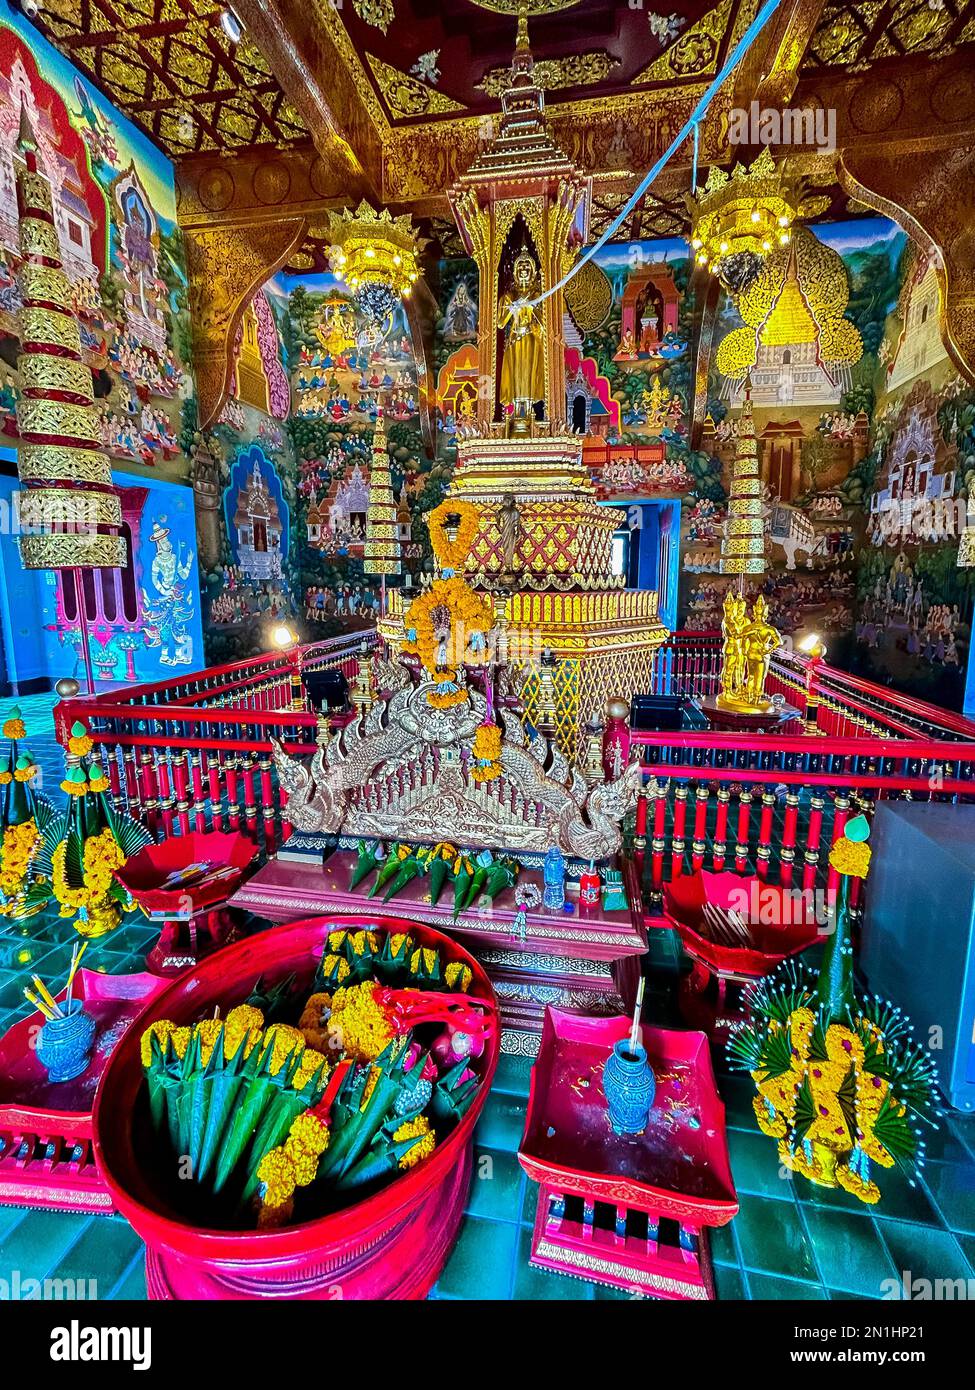 Mueang, Chiang Mai, Thailand, Inside View of Altar, Showing Offerings to Buddha, Decorations,, at Phra Singh (full name: Wat Phra Singh Woramahaviharn; Thai: วัดพระสิงห์วรมหาวิหาร; RTGS: Wat Phra Sing Wora Maha Wihan; (pronunciation); Northern Thai: LN-Wat Phrasing Woravihar.png) is a Buddhist temple (Thai language: Wat) in Chiang Mai, northern Thailand. King Ananda Mahidol (Rama VIII), bestowed upon it the status of Royal temple of the first grade in 1935. Stock Photo